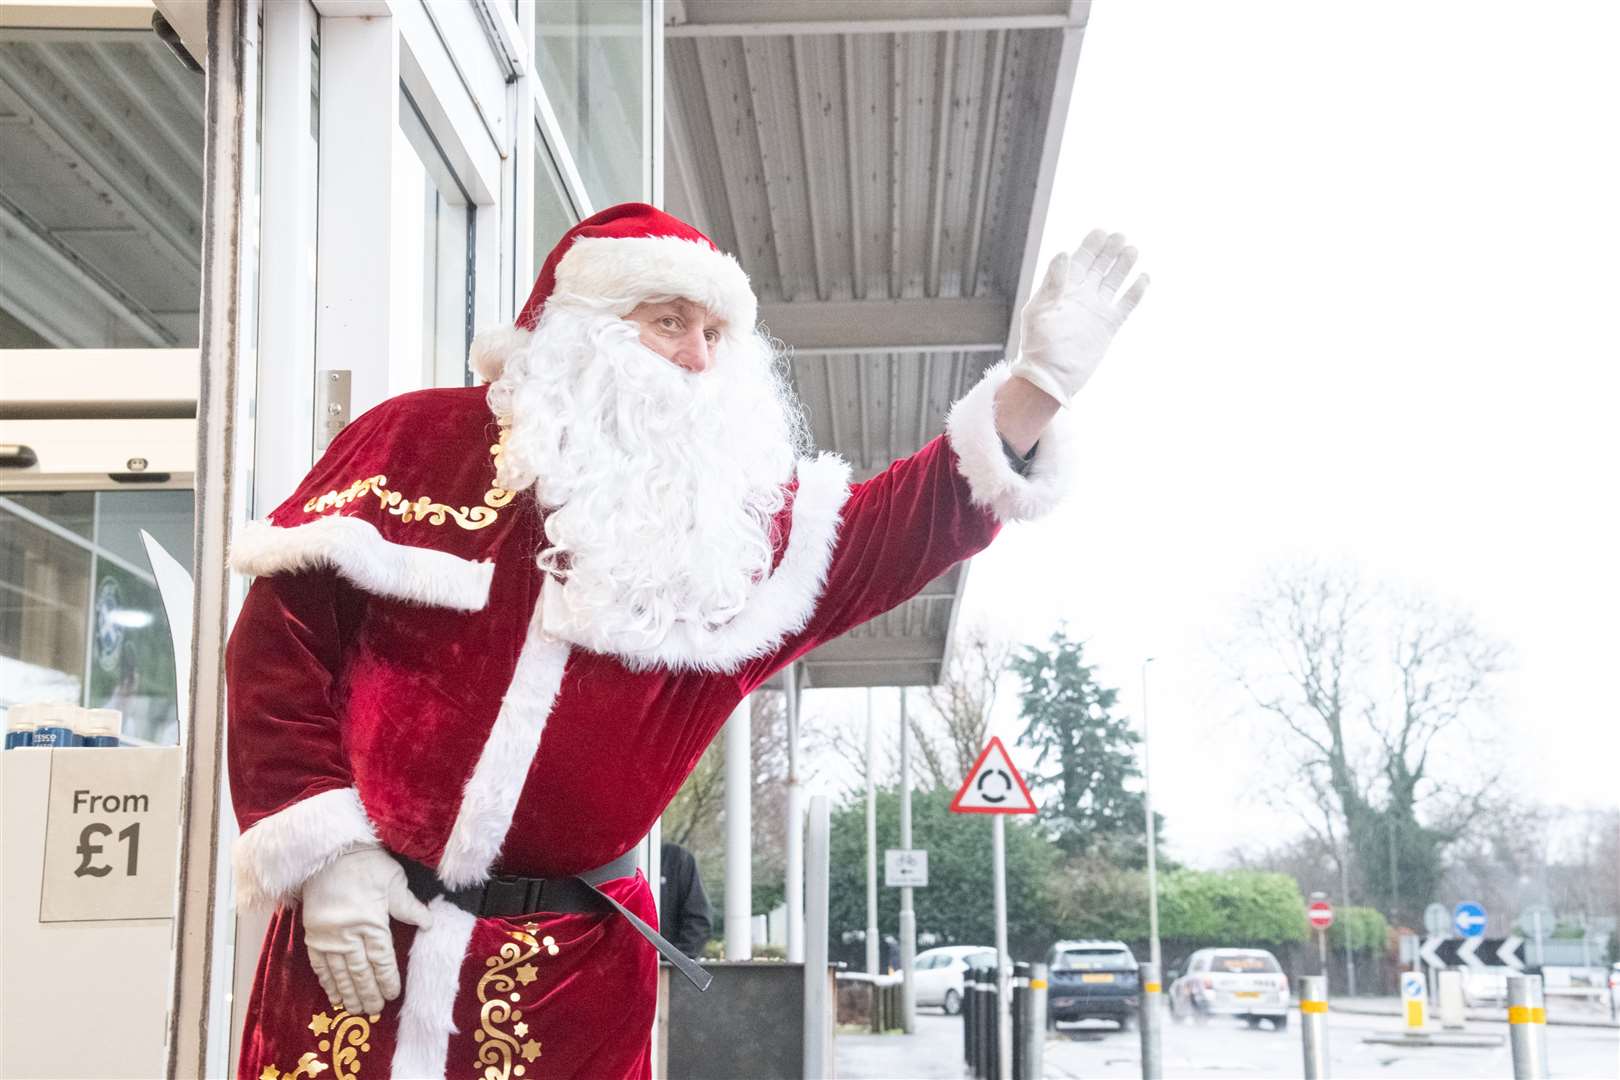 Santa waving to shoppers arriving in their cars.